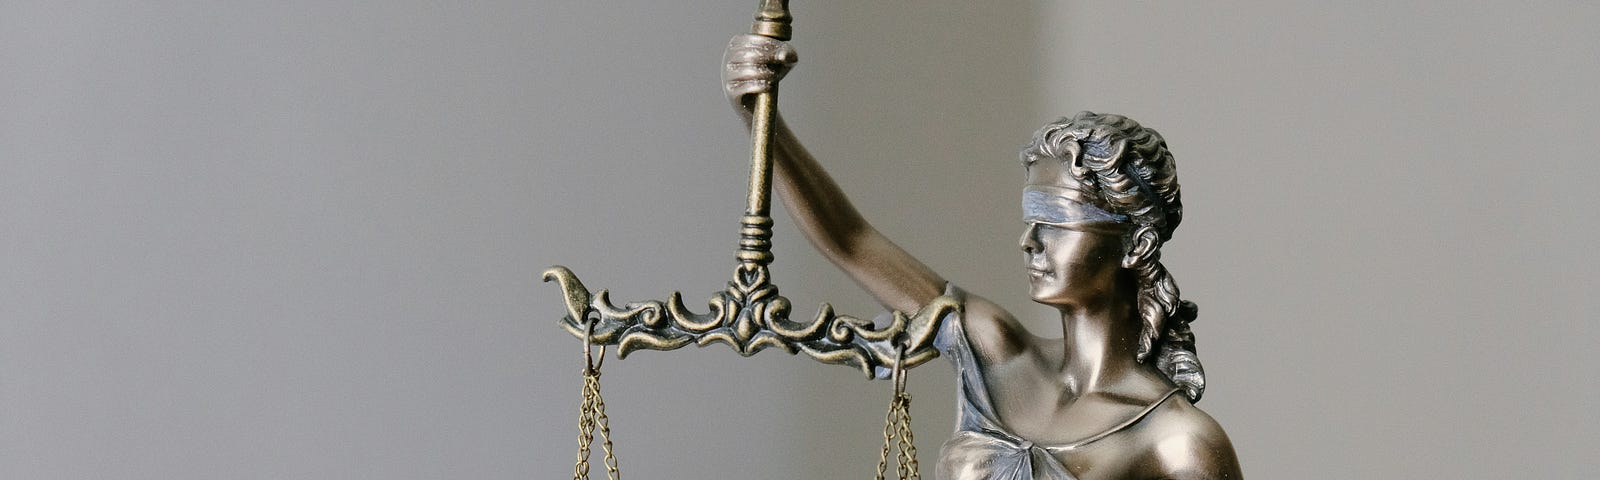 A bronze sculpture of Lady Justice, blindfolded eyes with a balance & a sword in hands.